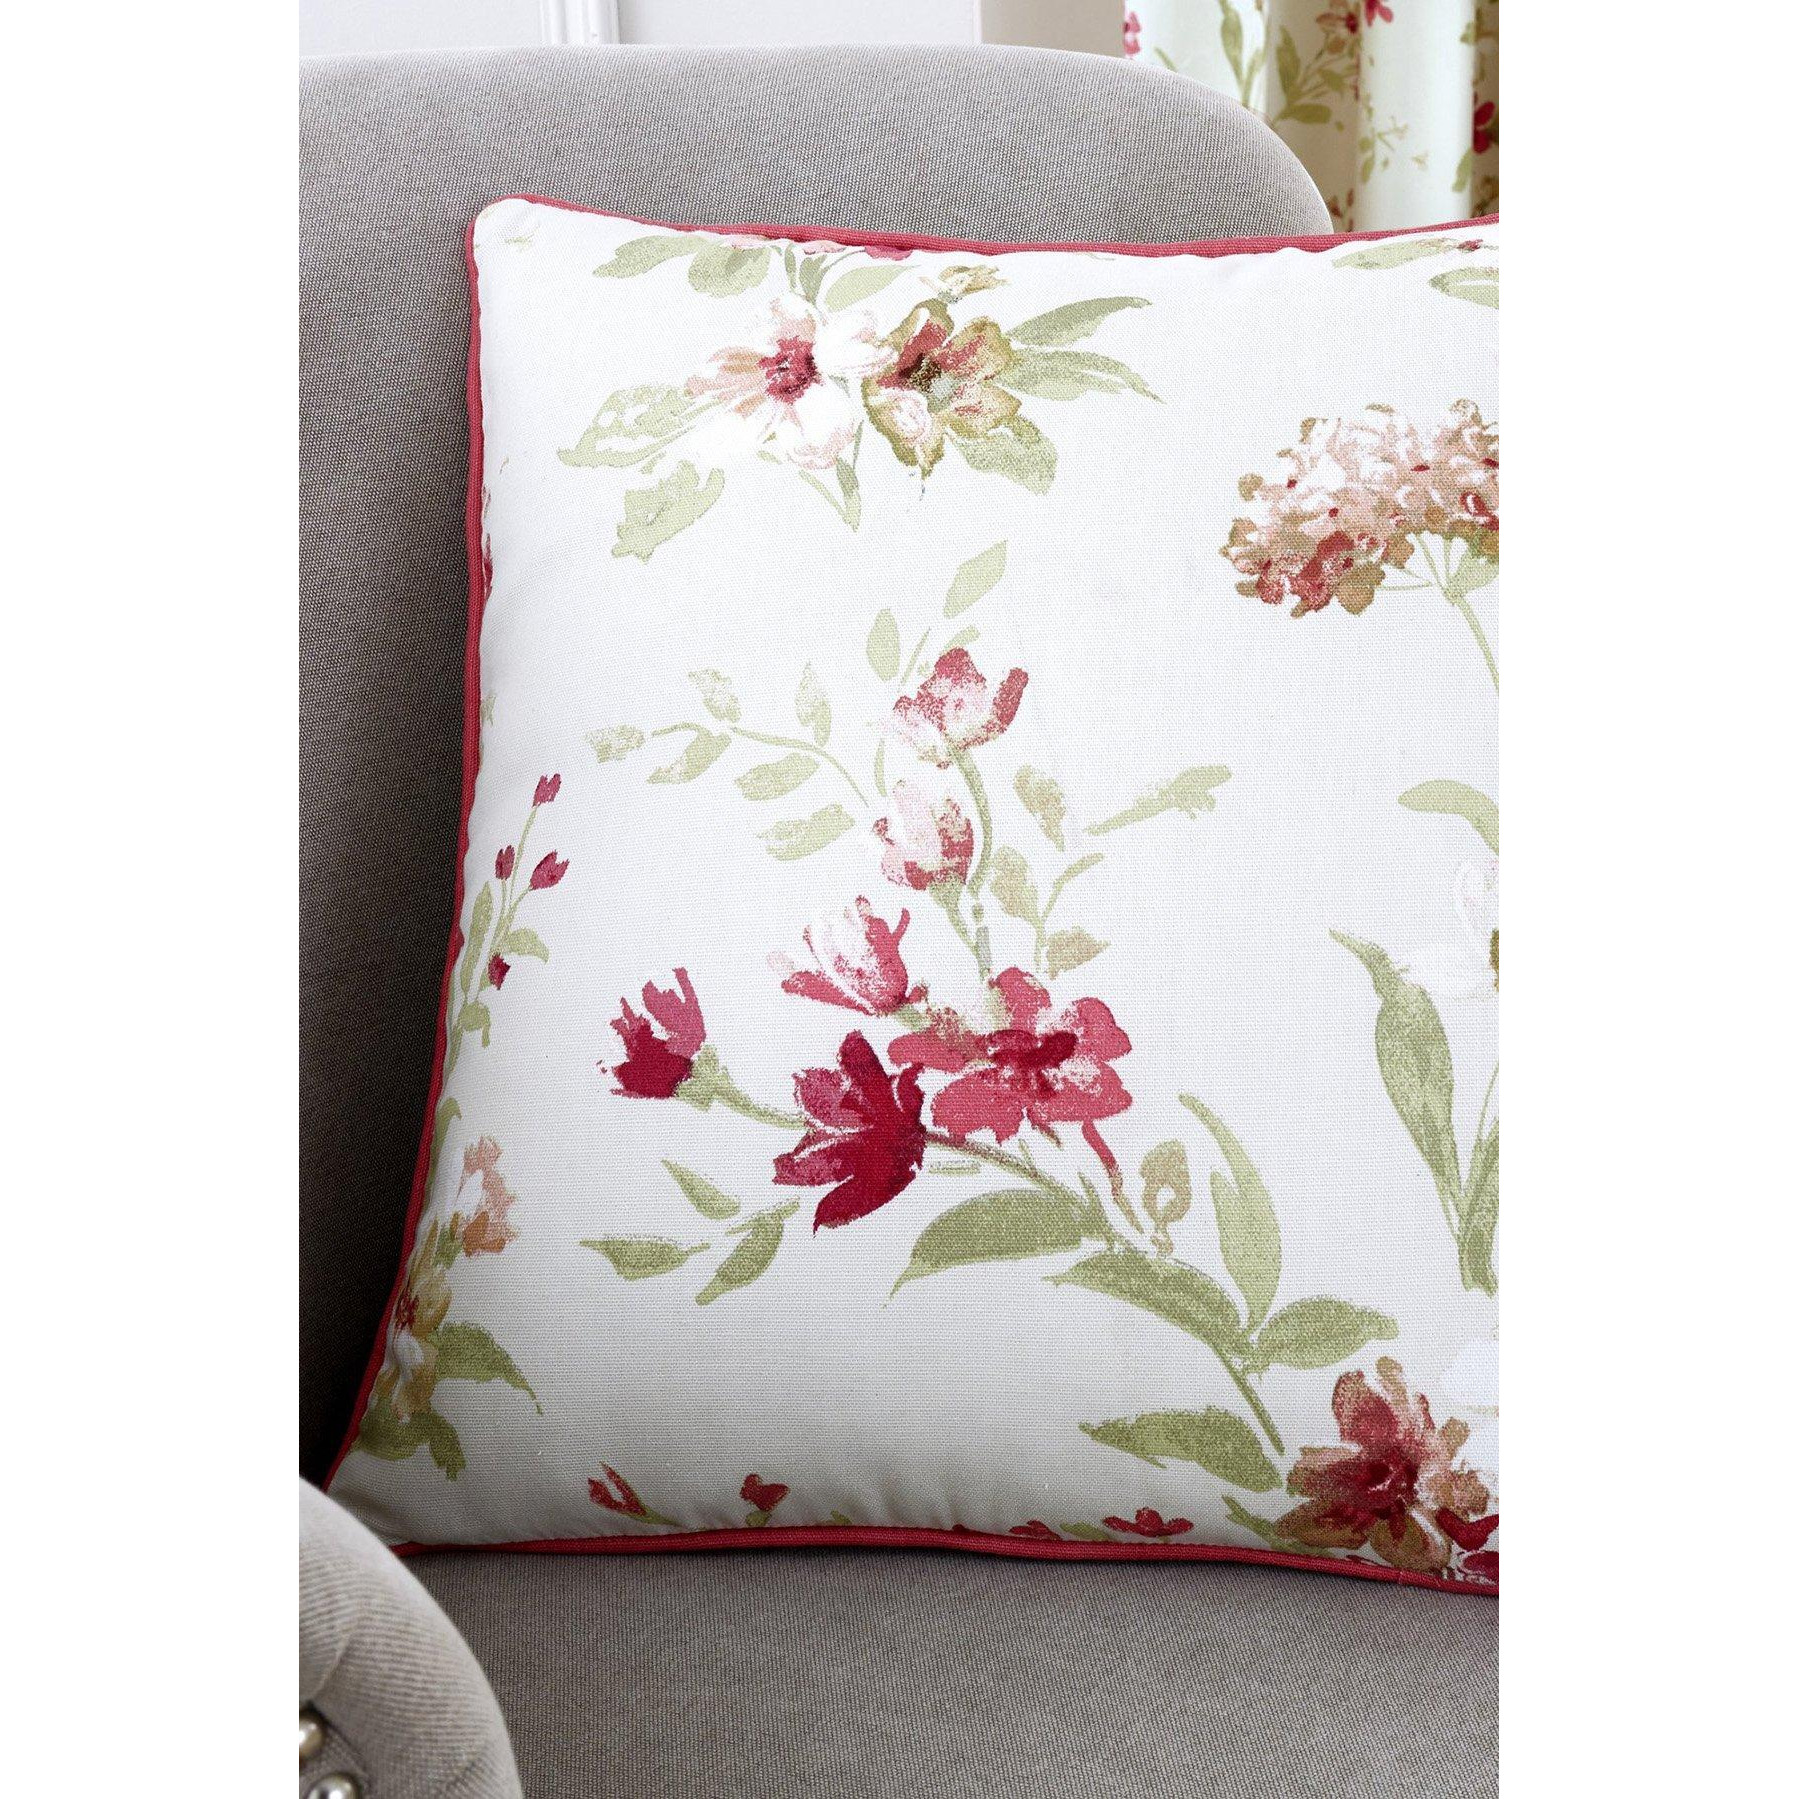 'Jeannie' Classic Floral Trail Print Filled Cushion 100% Cotton - image 1